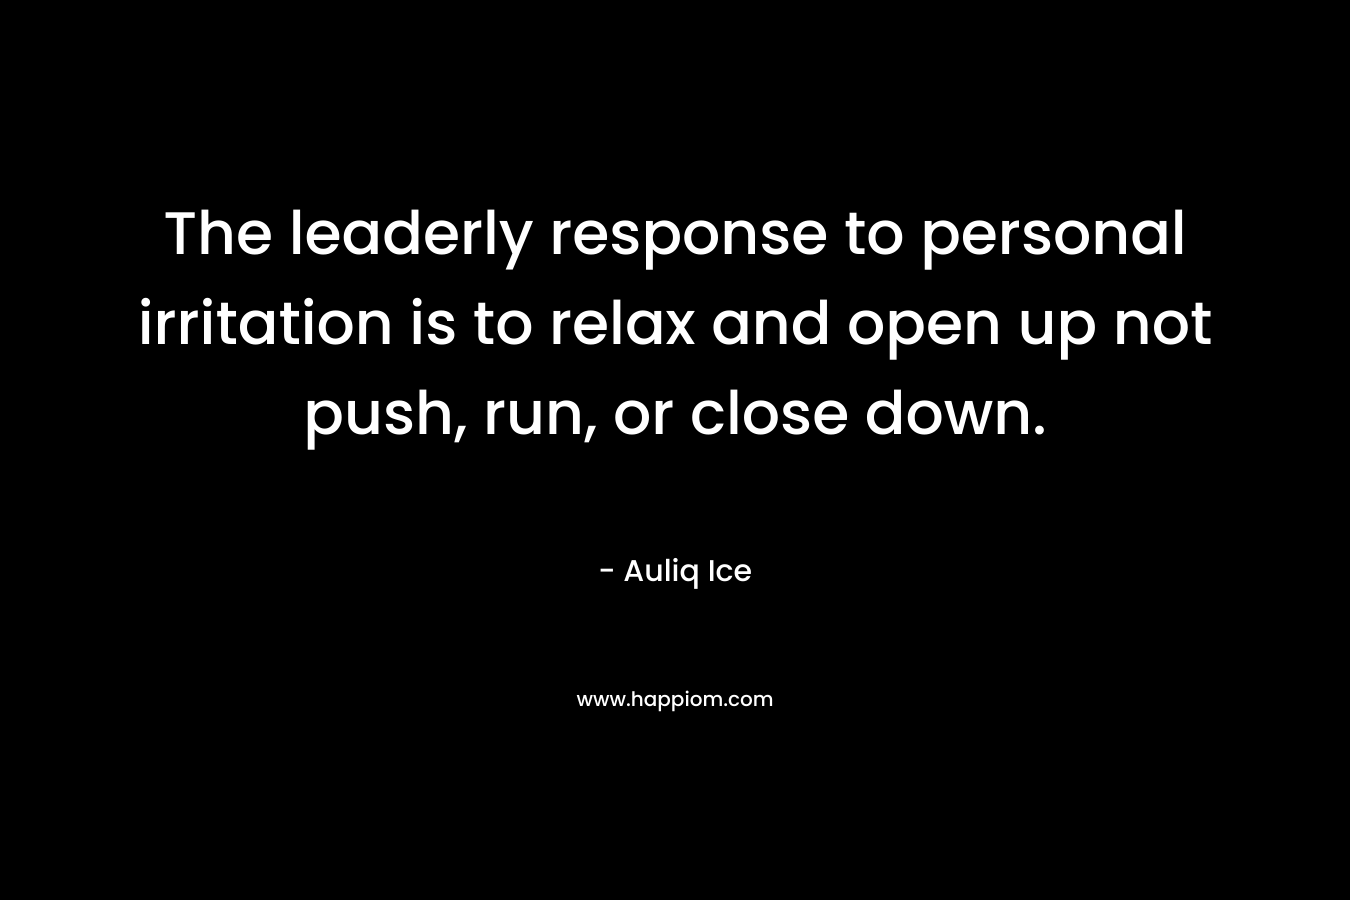 The leaderly response to personal irritation is to relax and open up not push, run, or close down. – Auliq Ice